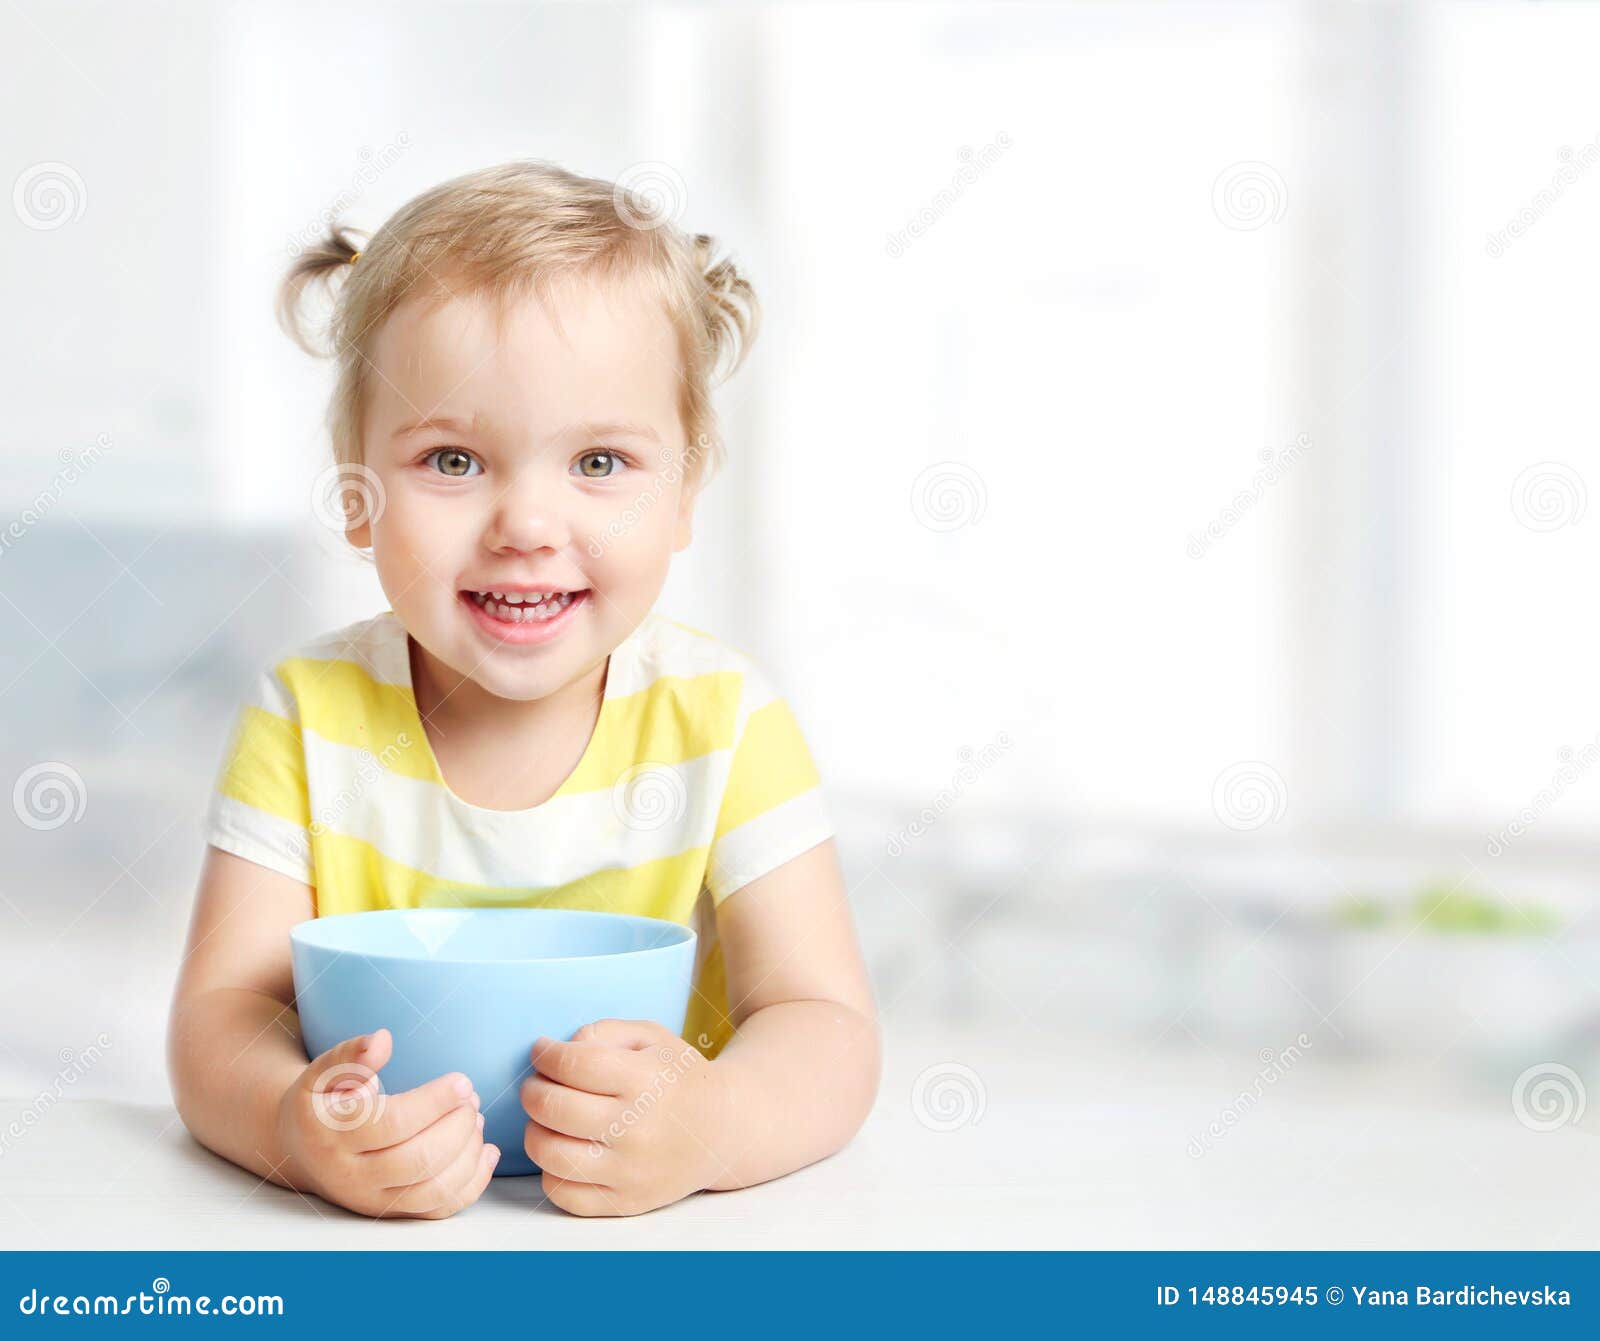 Child With Bowl Plate Kid S Nutrition Girl Eating Stock Image Image Of Food Dinner